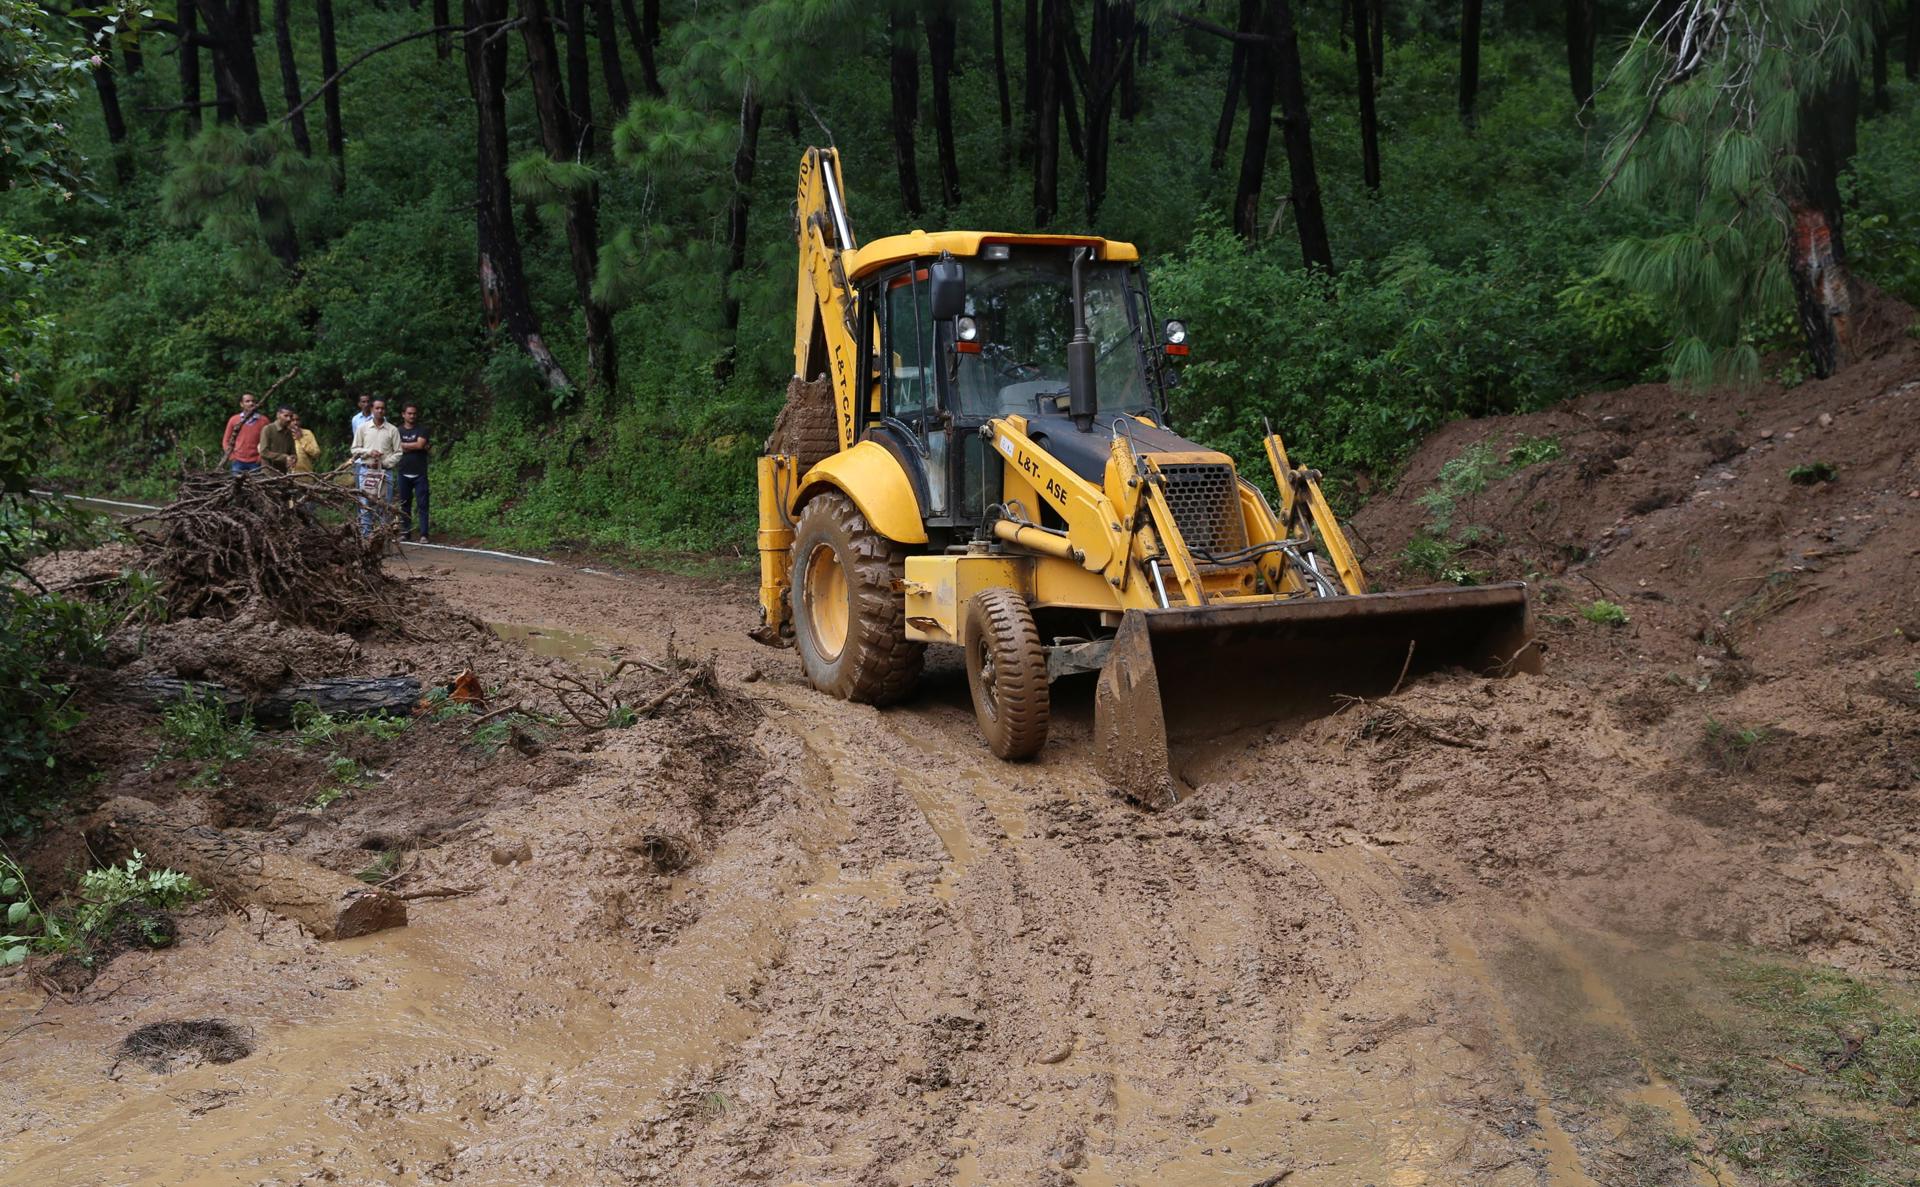 A file picture shows workers using a bulldozer to clear up the debris at the site of a landslide in Nagrota Bagwan in Himachal Pradesh, India. EPA/EFE/FILE/SANJAY BAID